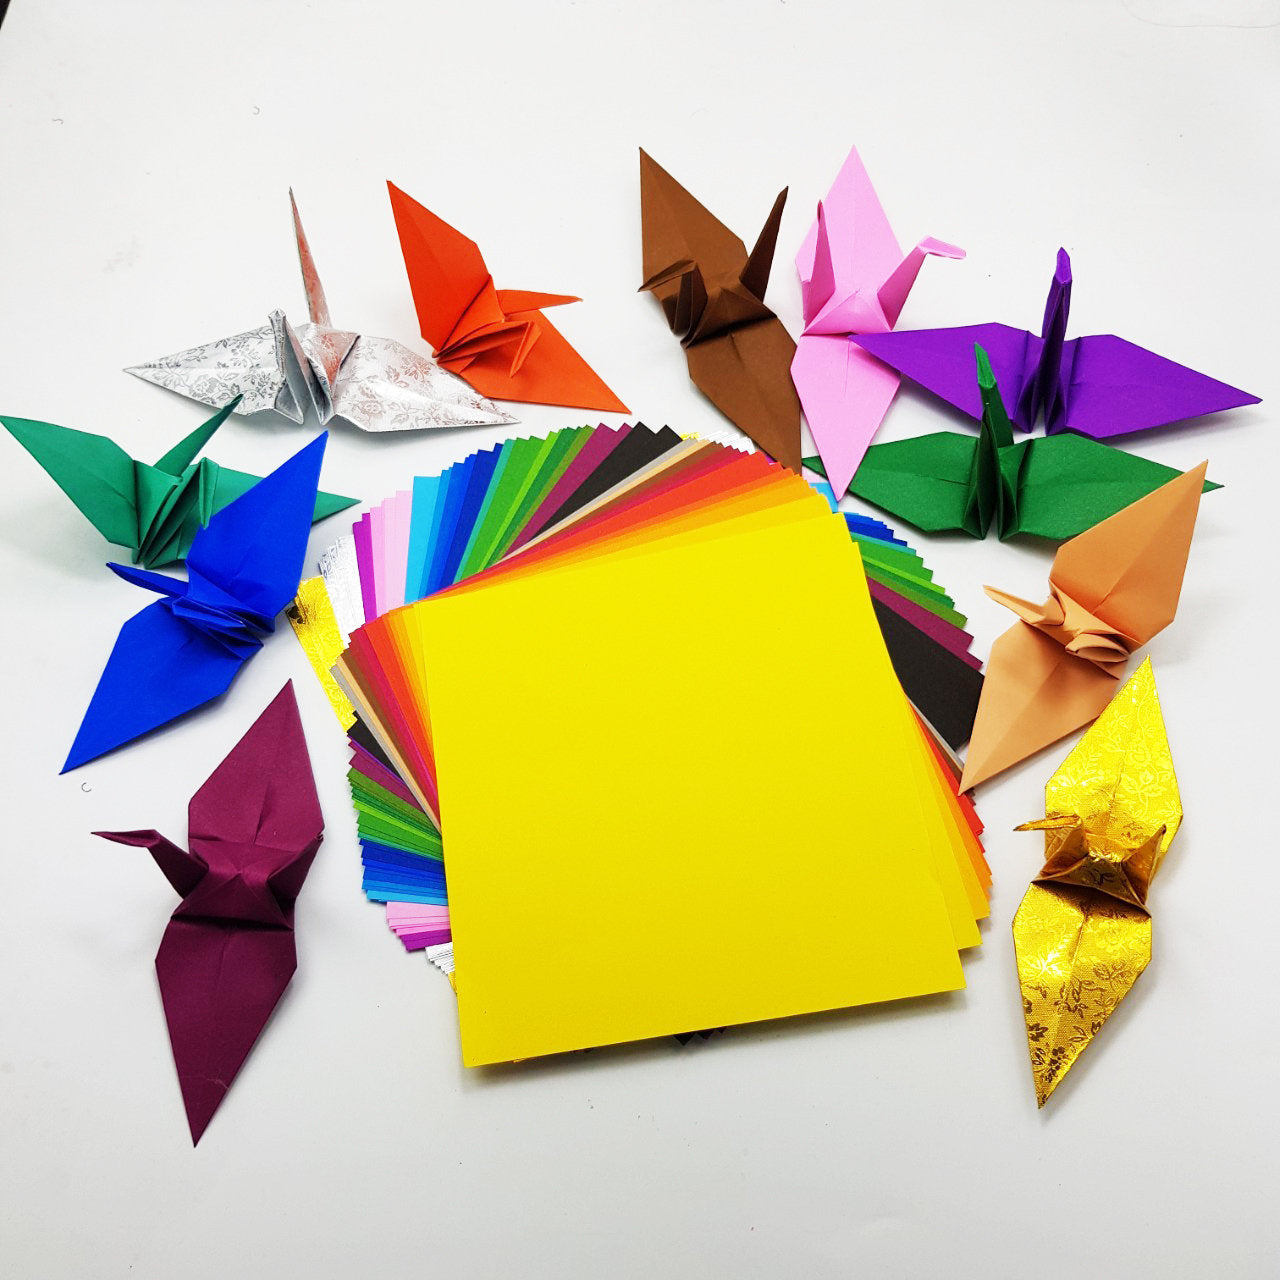 101 Origami Paper Sheets 31 Color 6x6 inches paper pack Paper craft Paper Cranes Flower,Origami Paper Pack double slide